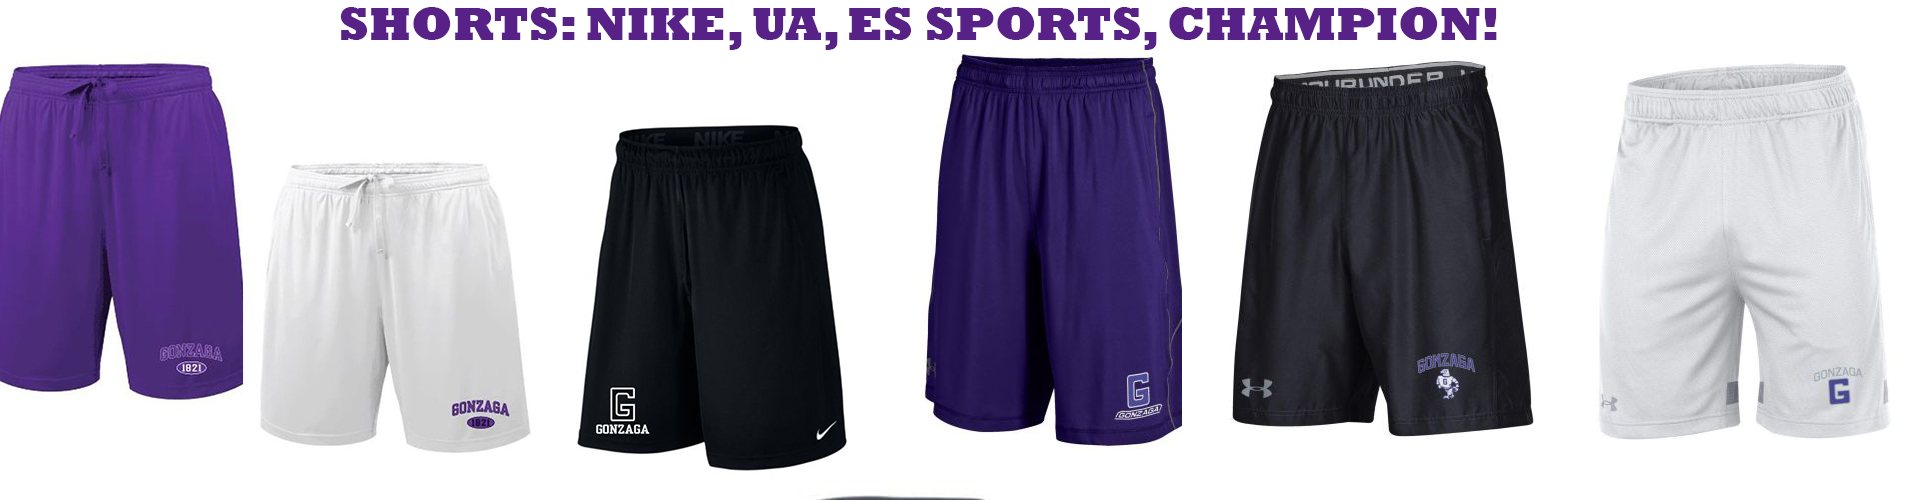 Gonzaga Shorts for All!